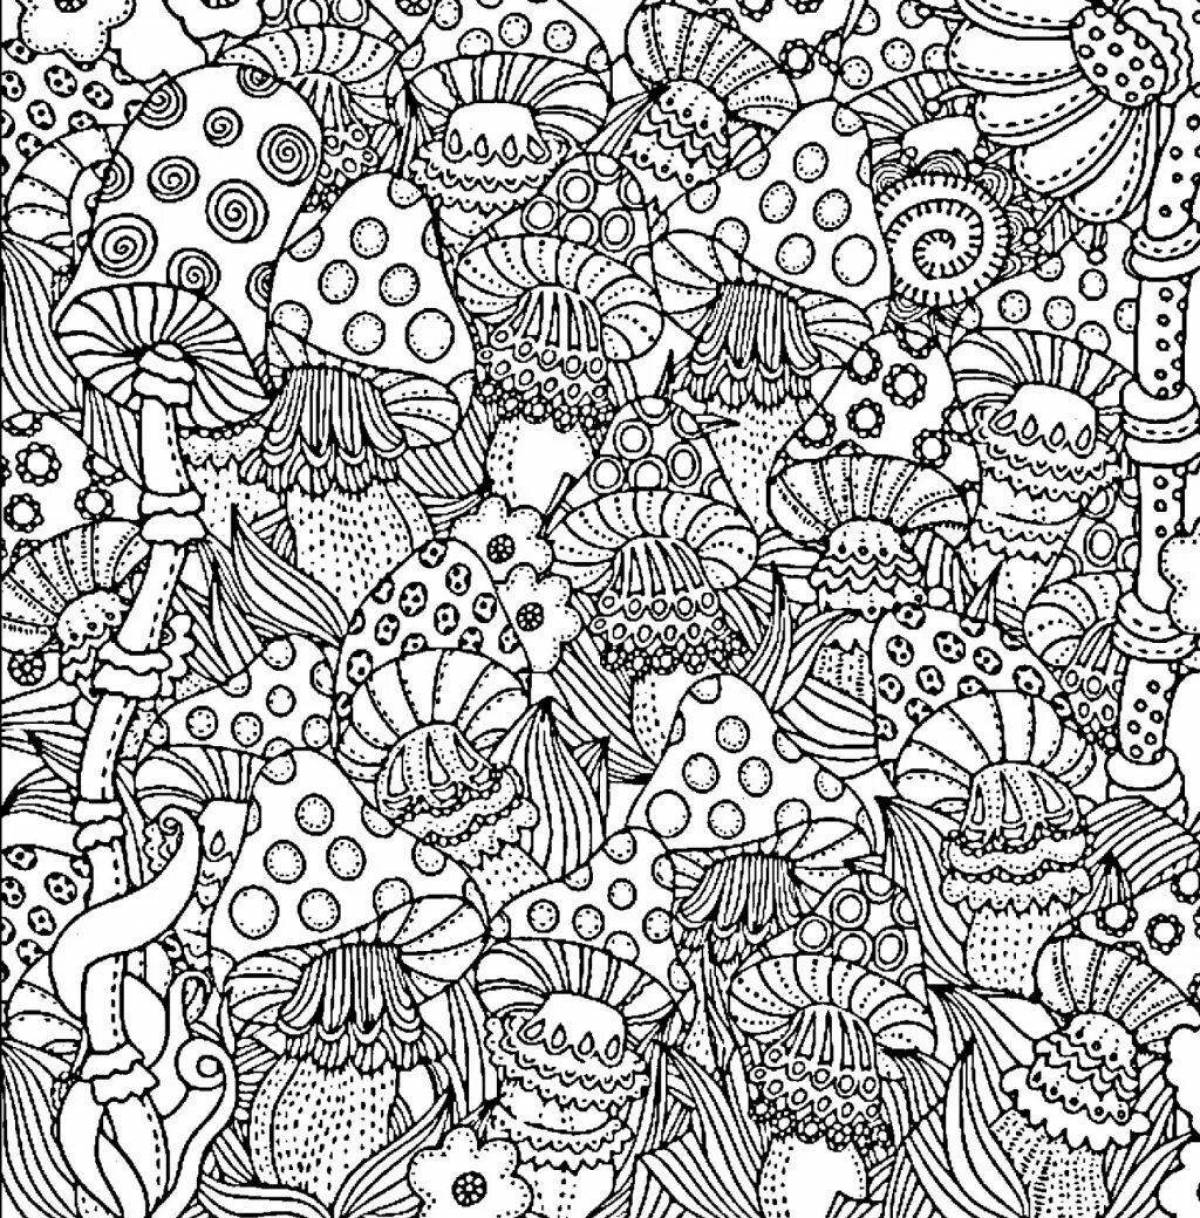 Playful anti-stress coloring book for teens